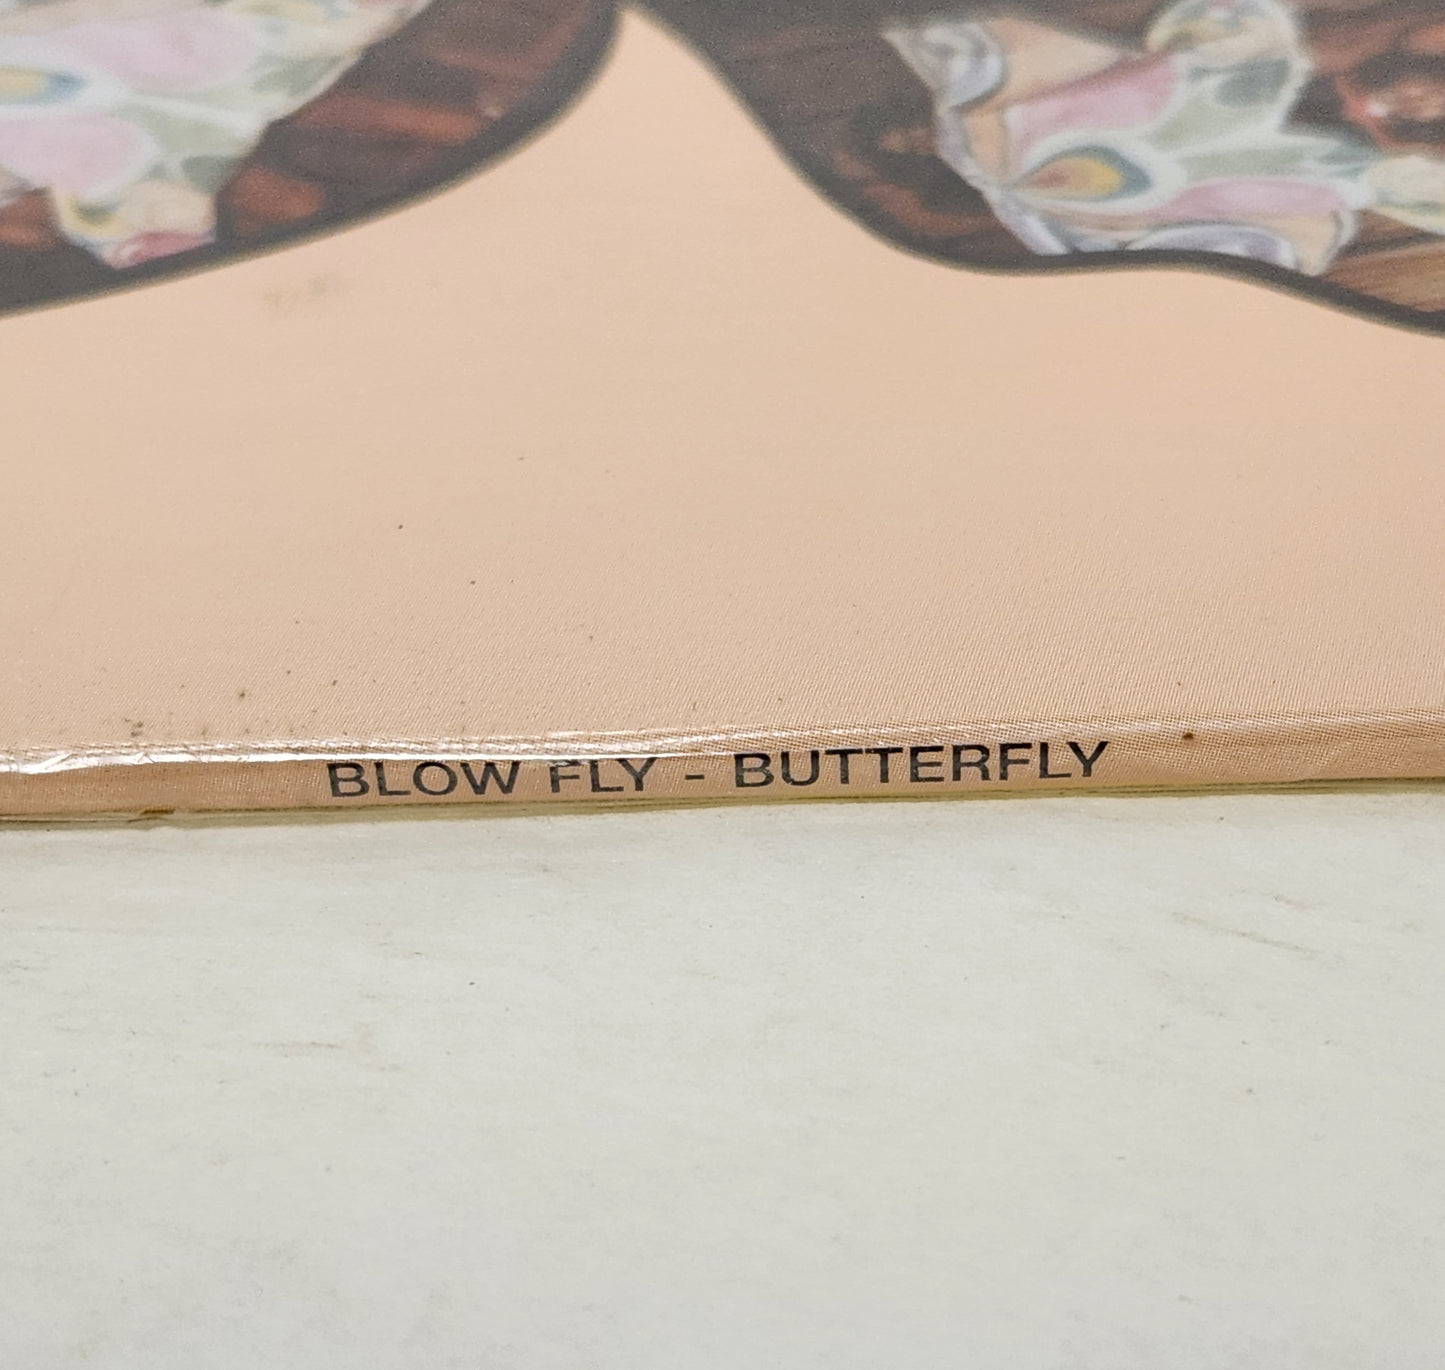 Blowfly "Butterfly"  1973 Rated X Raunchy Funk Comedy Record Album